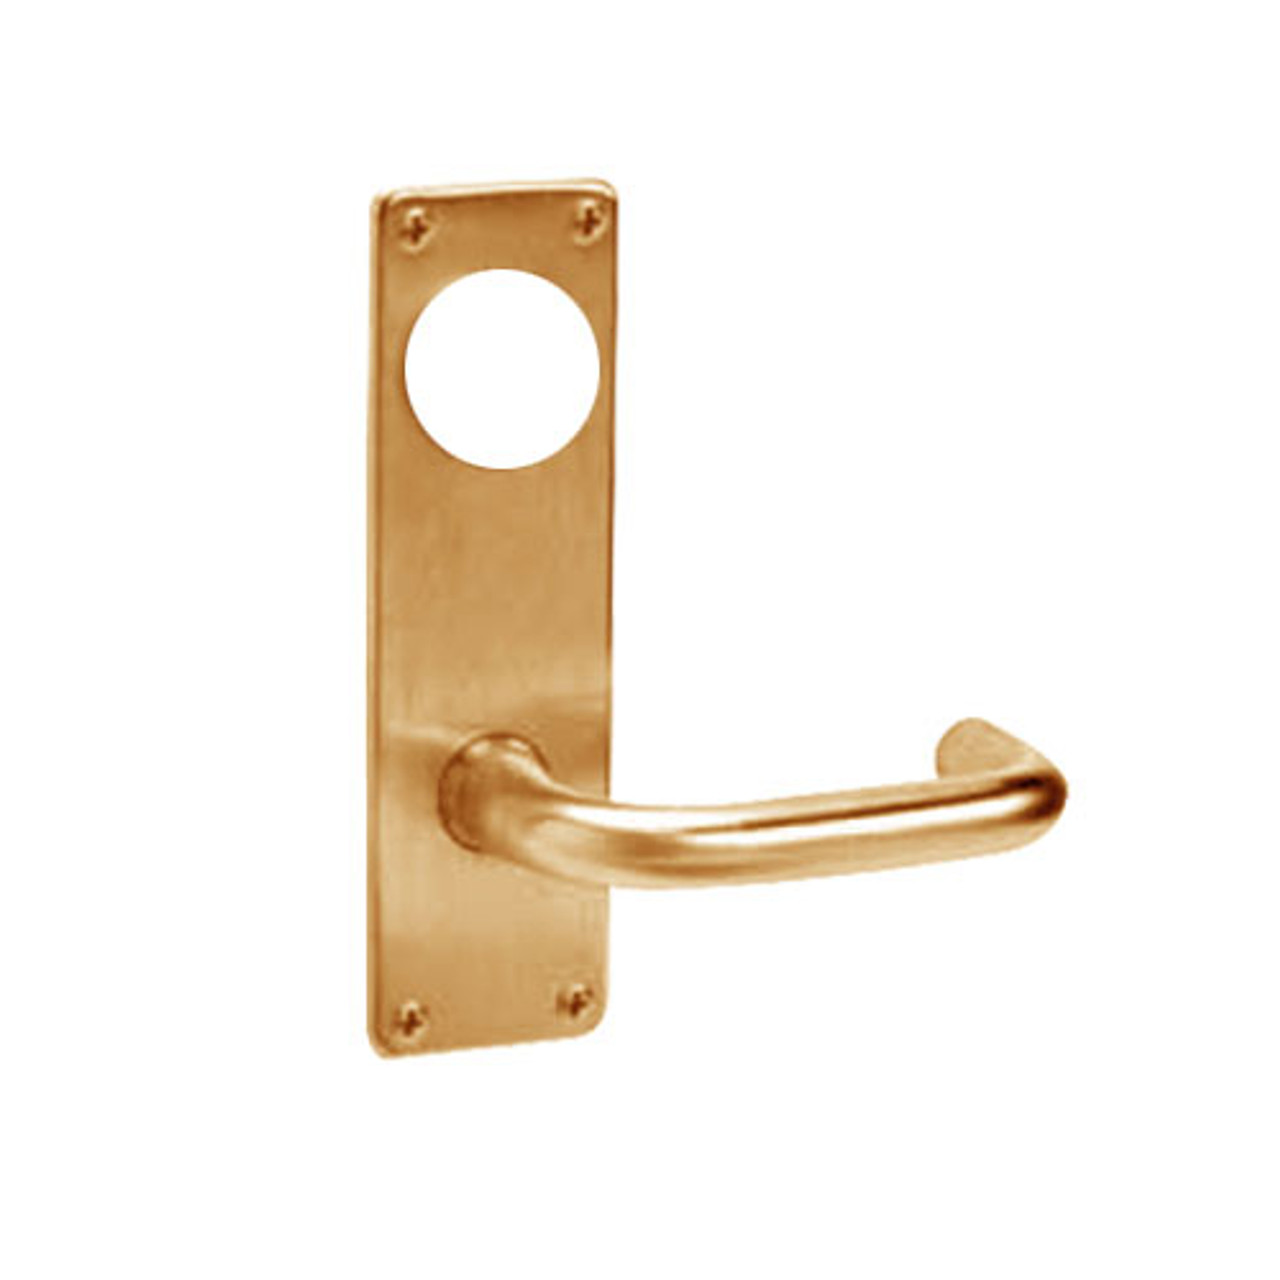 ML2032-LSN-612-M31 Corbin Russwin ML2000 Series Mortise Institution Trim Pack with Lustra Lever in Satin Bronze